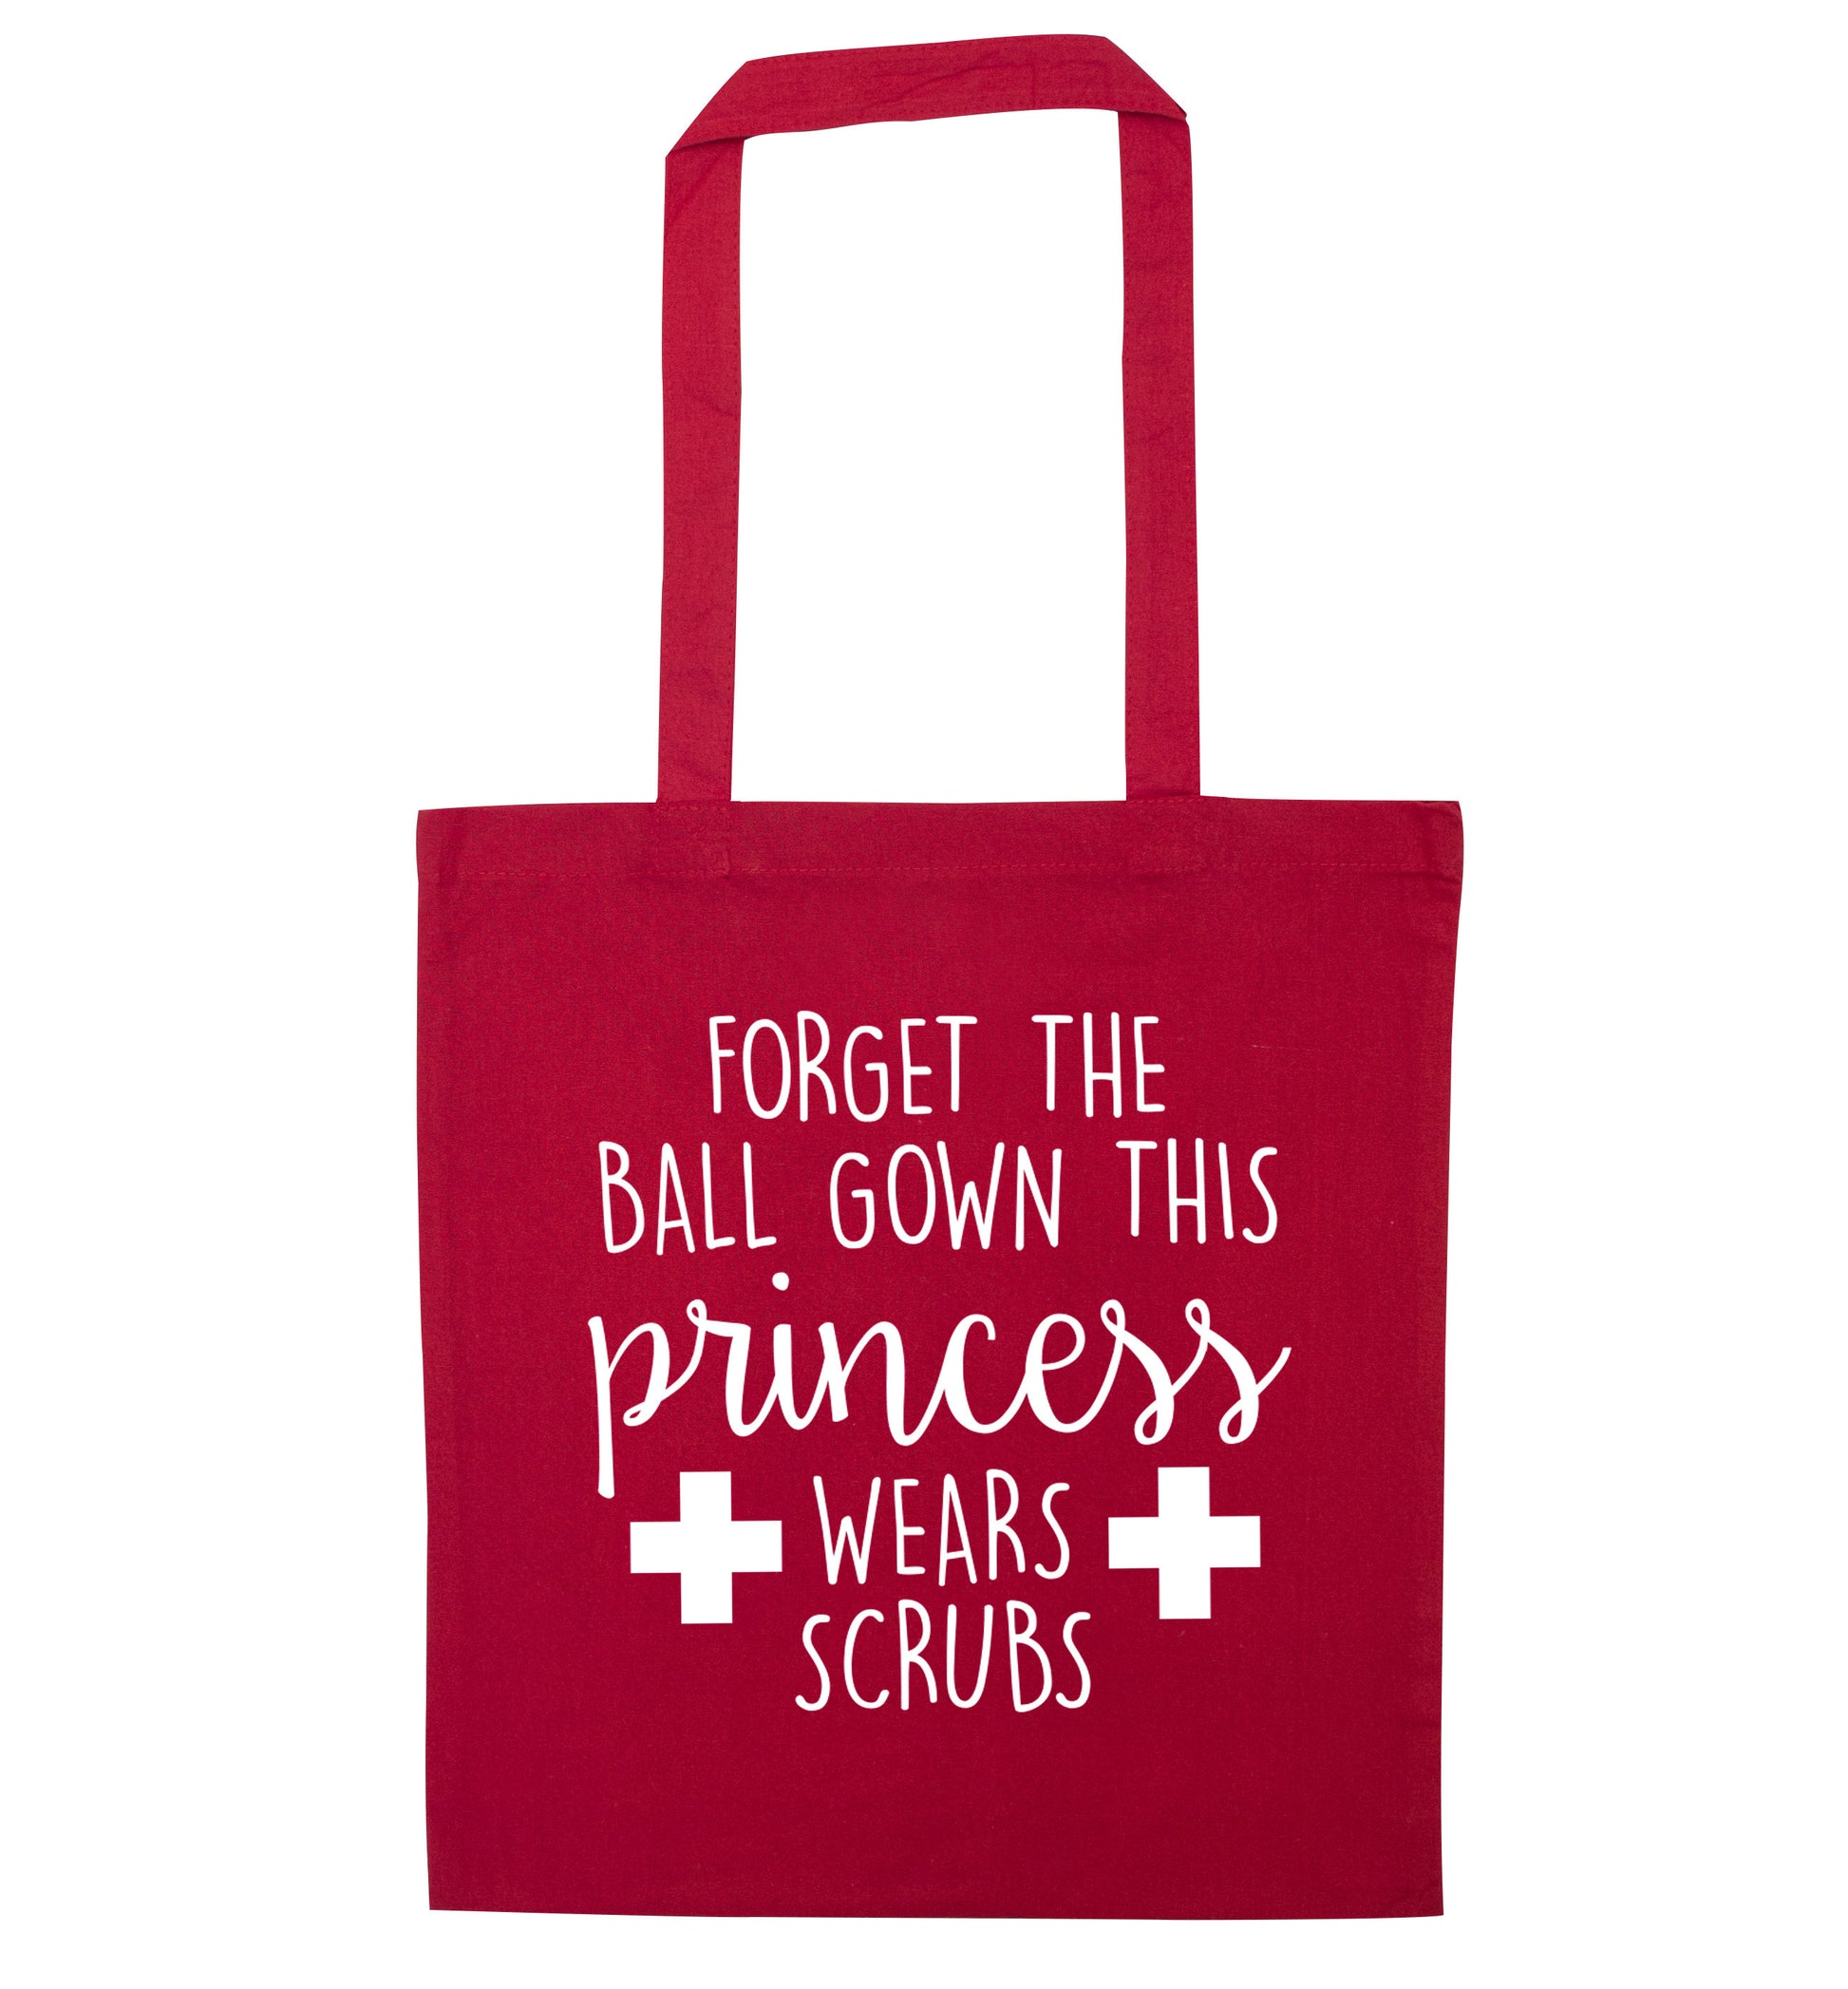 Forget the ball gown this princess wears scrubs red tote bag